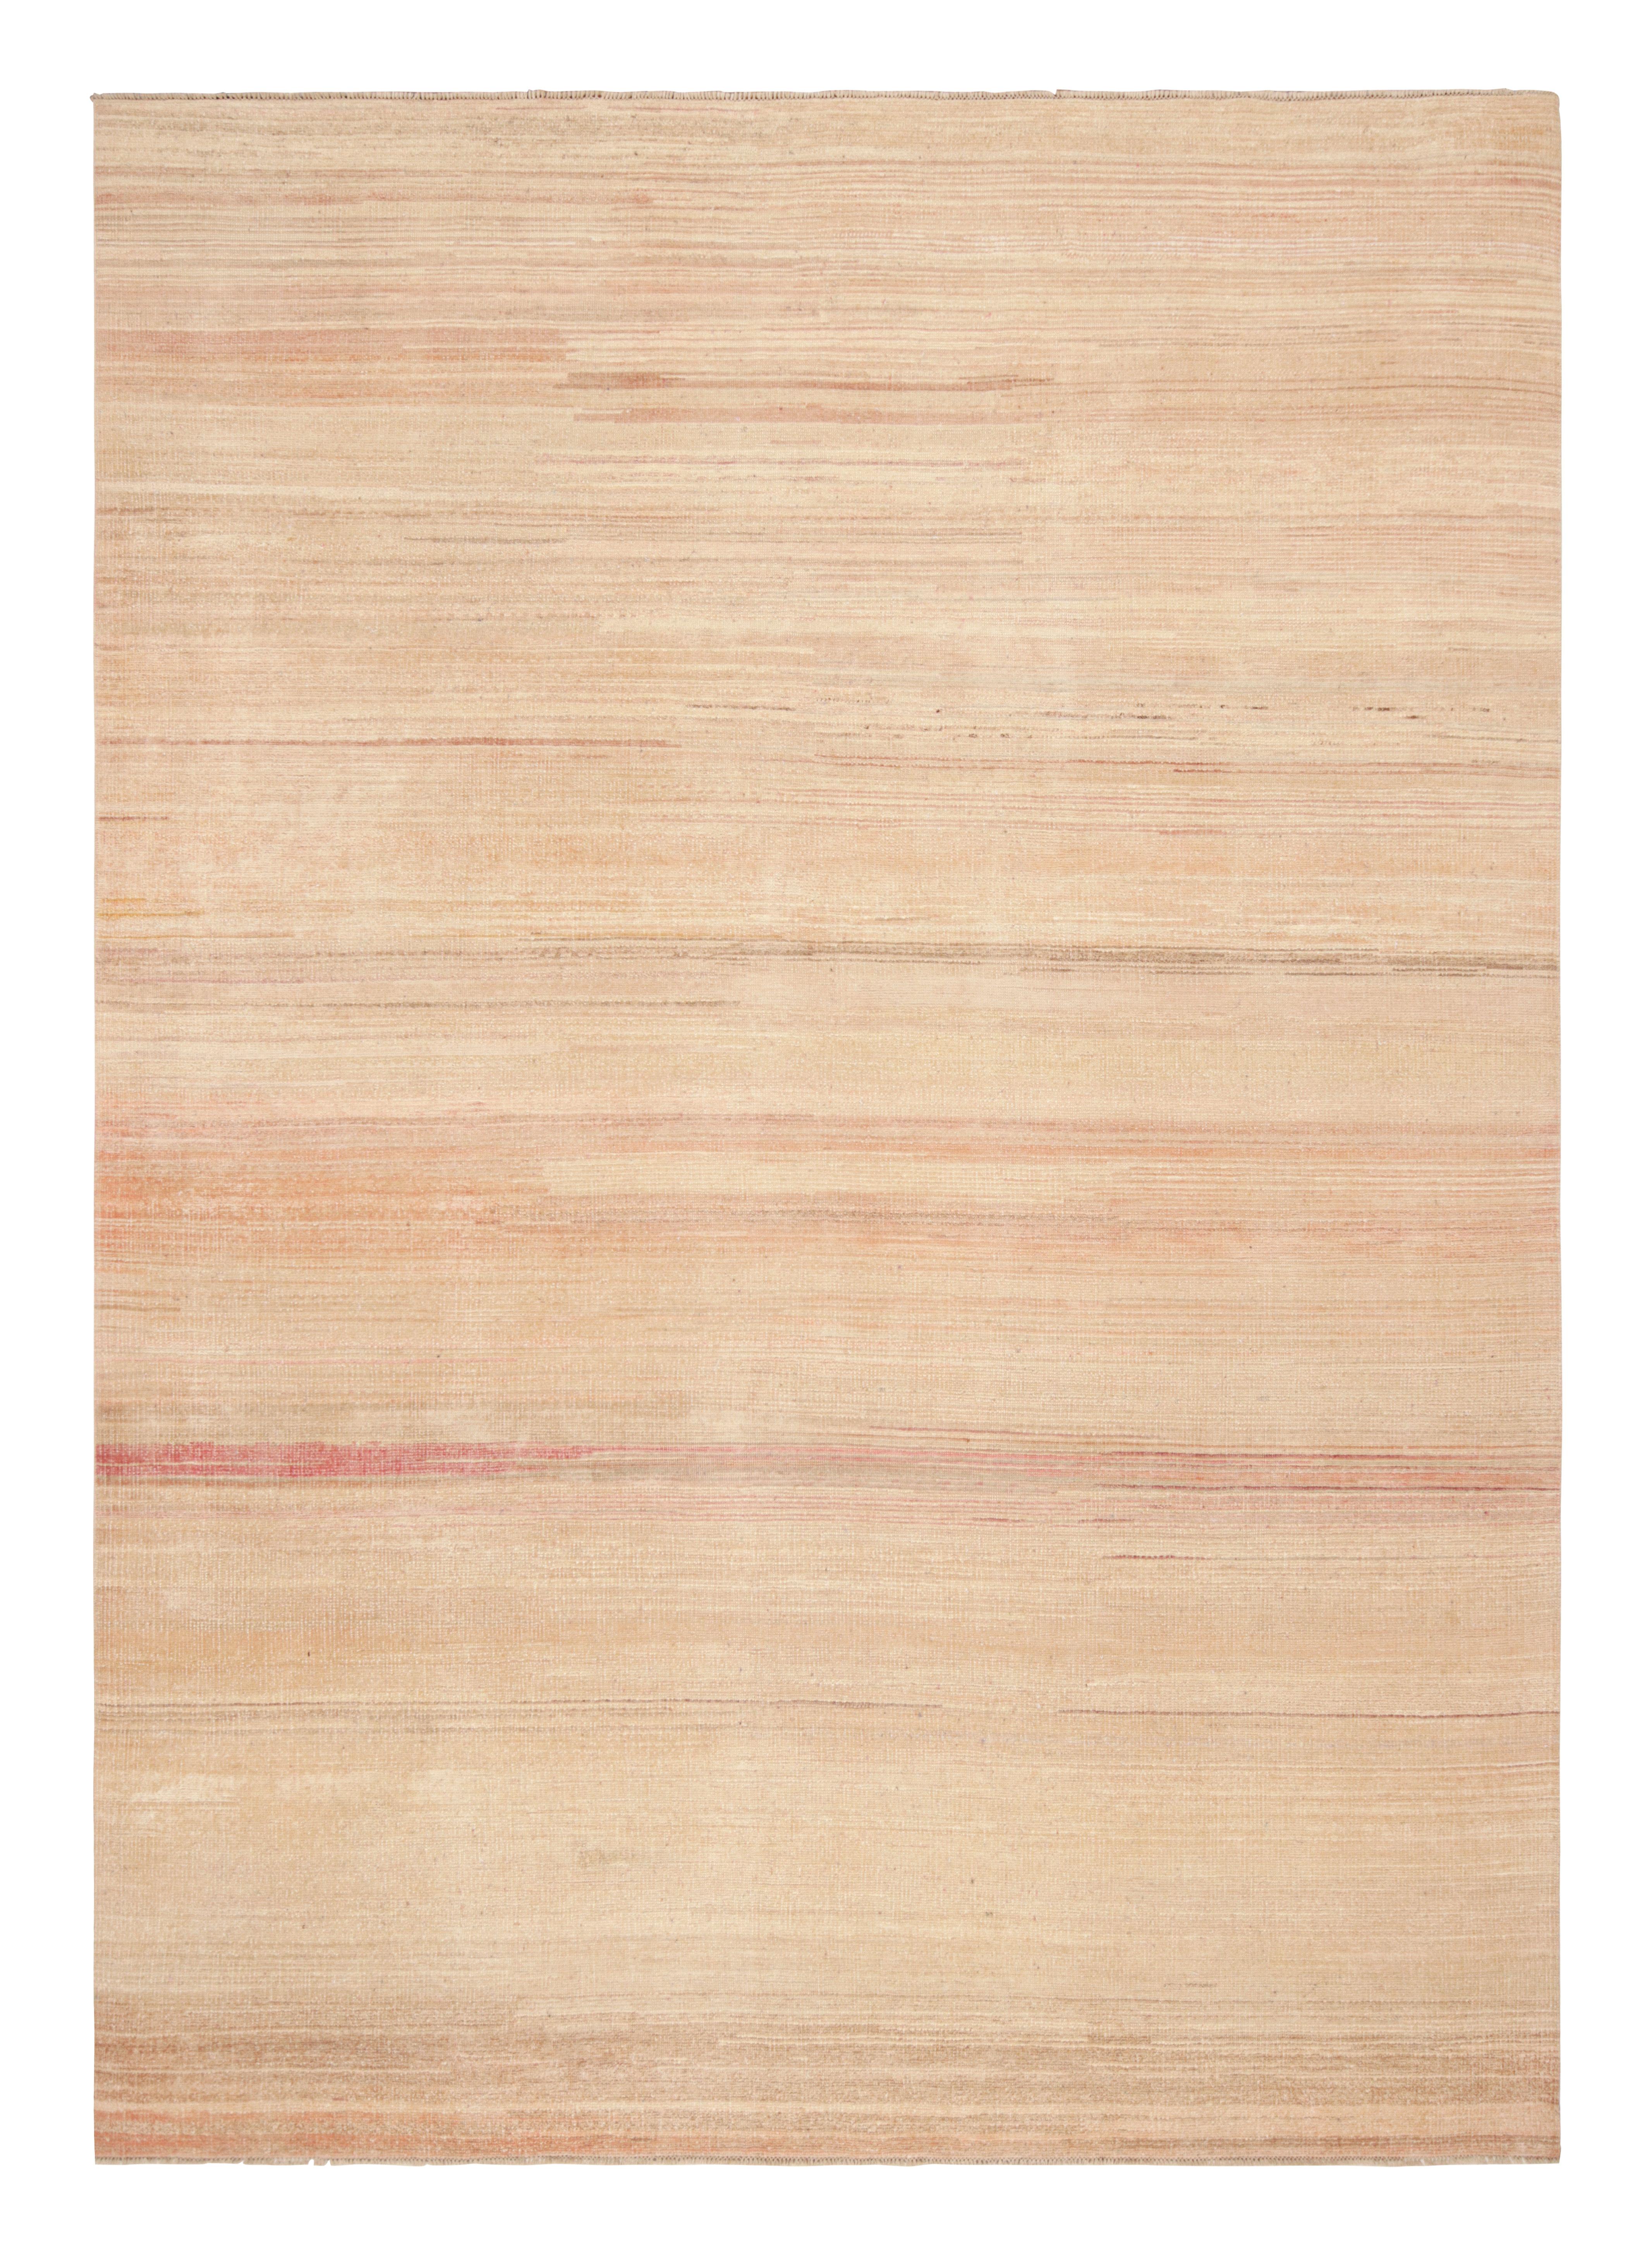 Wool Rug & Kilim’s Textural Rug in Peach Tones and Striae For Sale